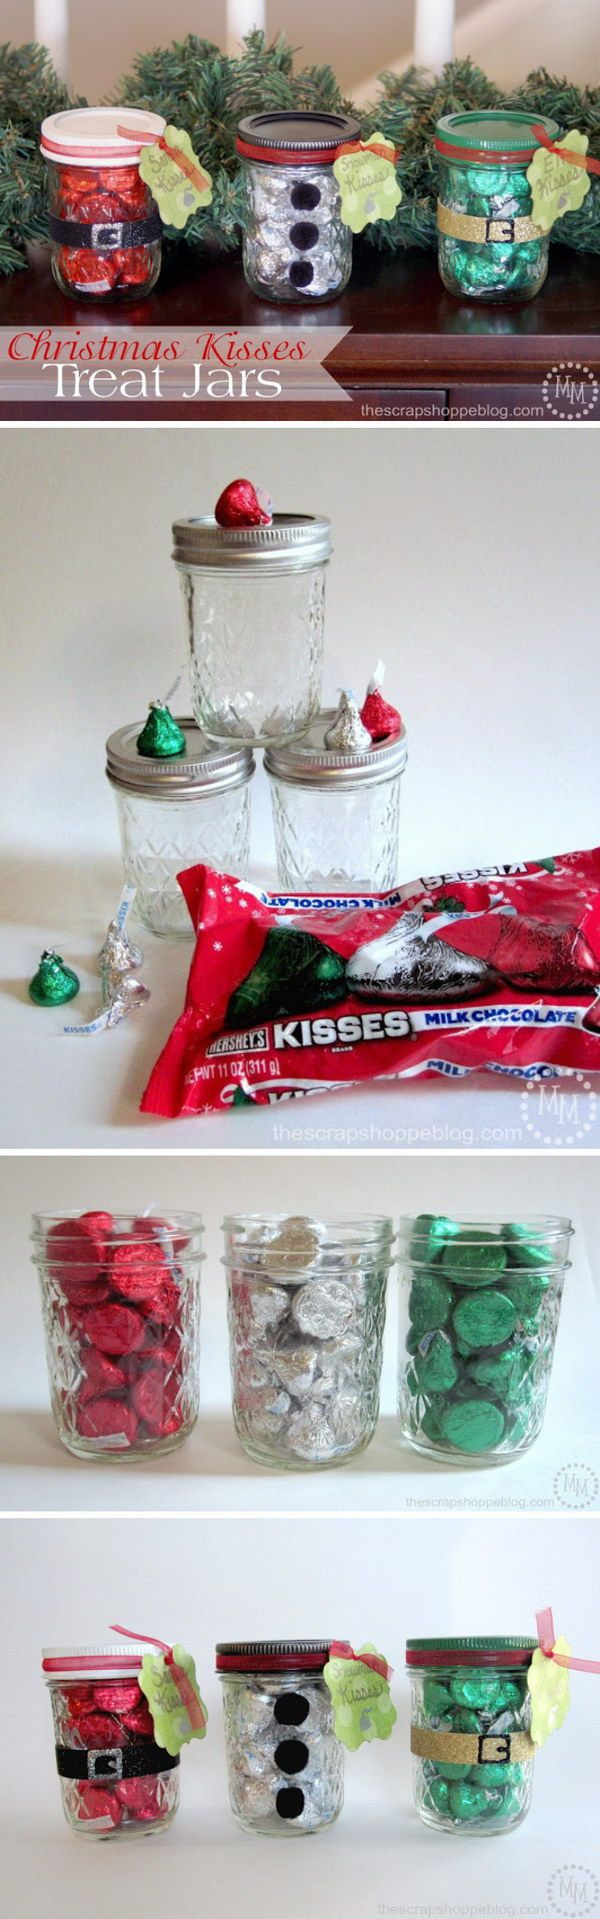 Easy Craft Gift Ideas
 15 Easy Mason Jar Christmas Decorations You Can Make